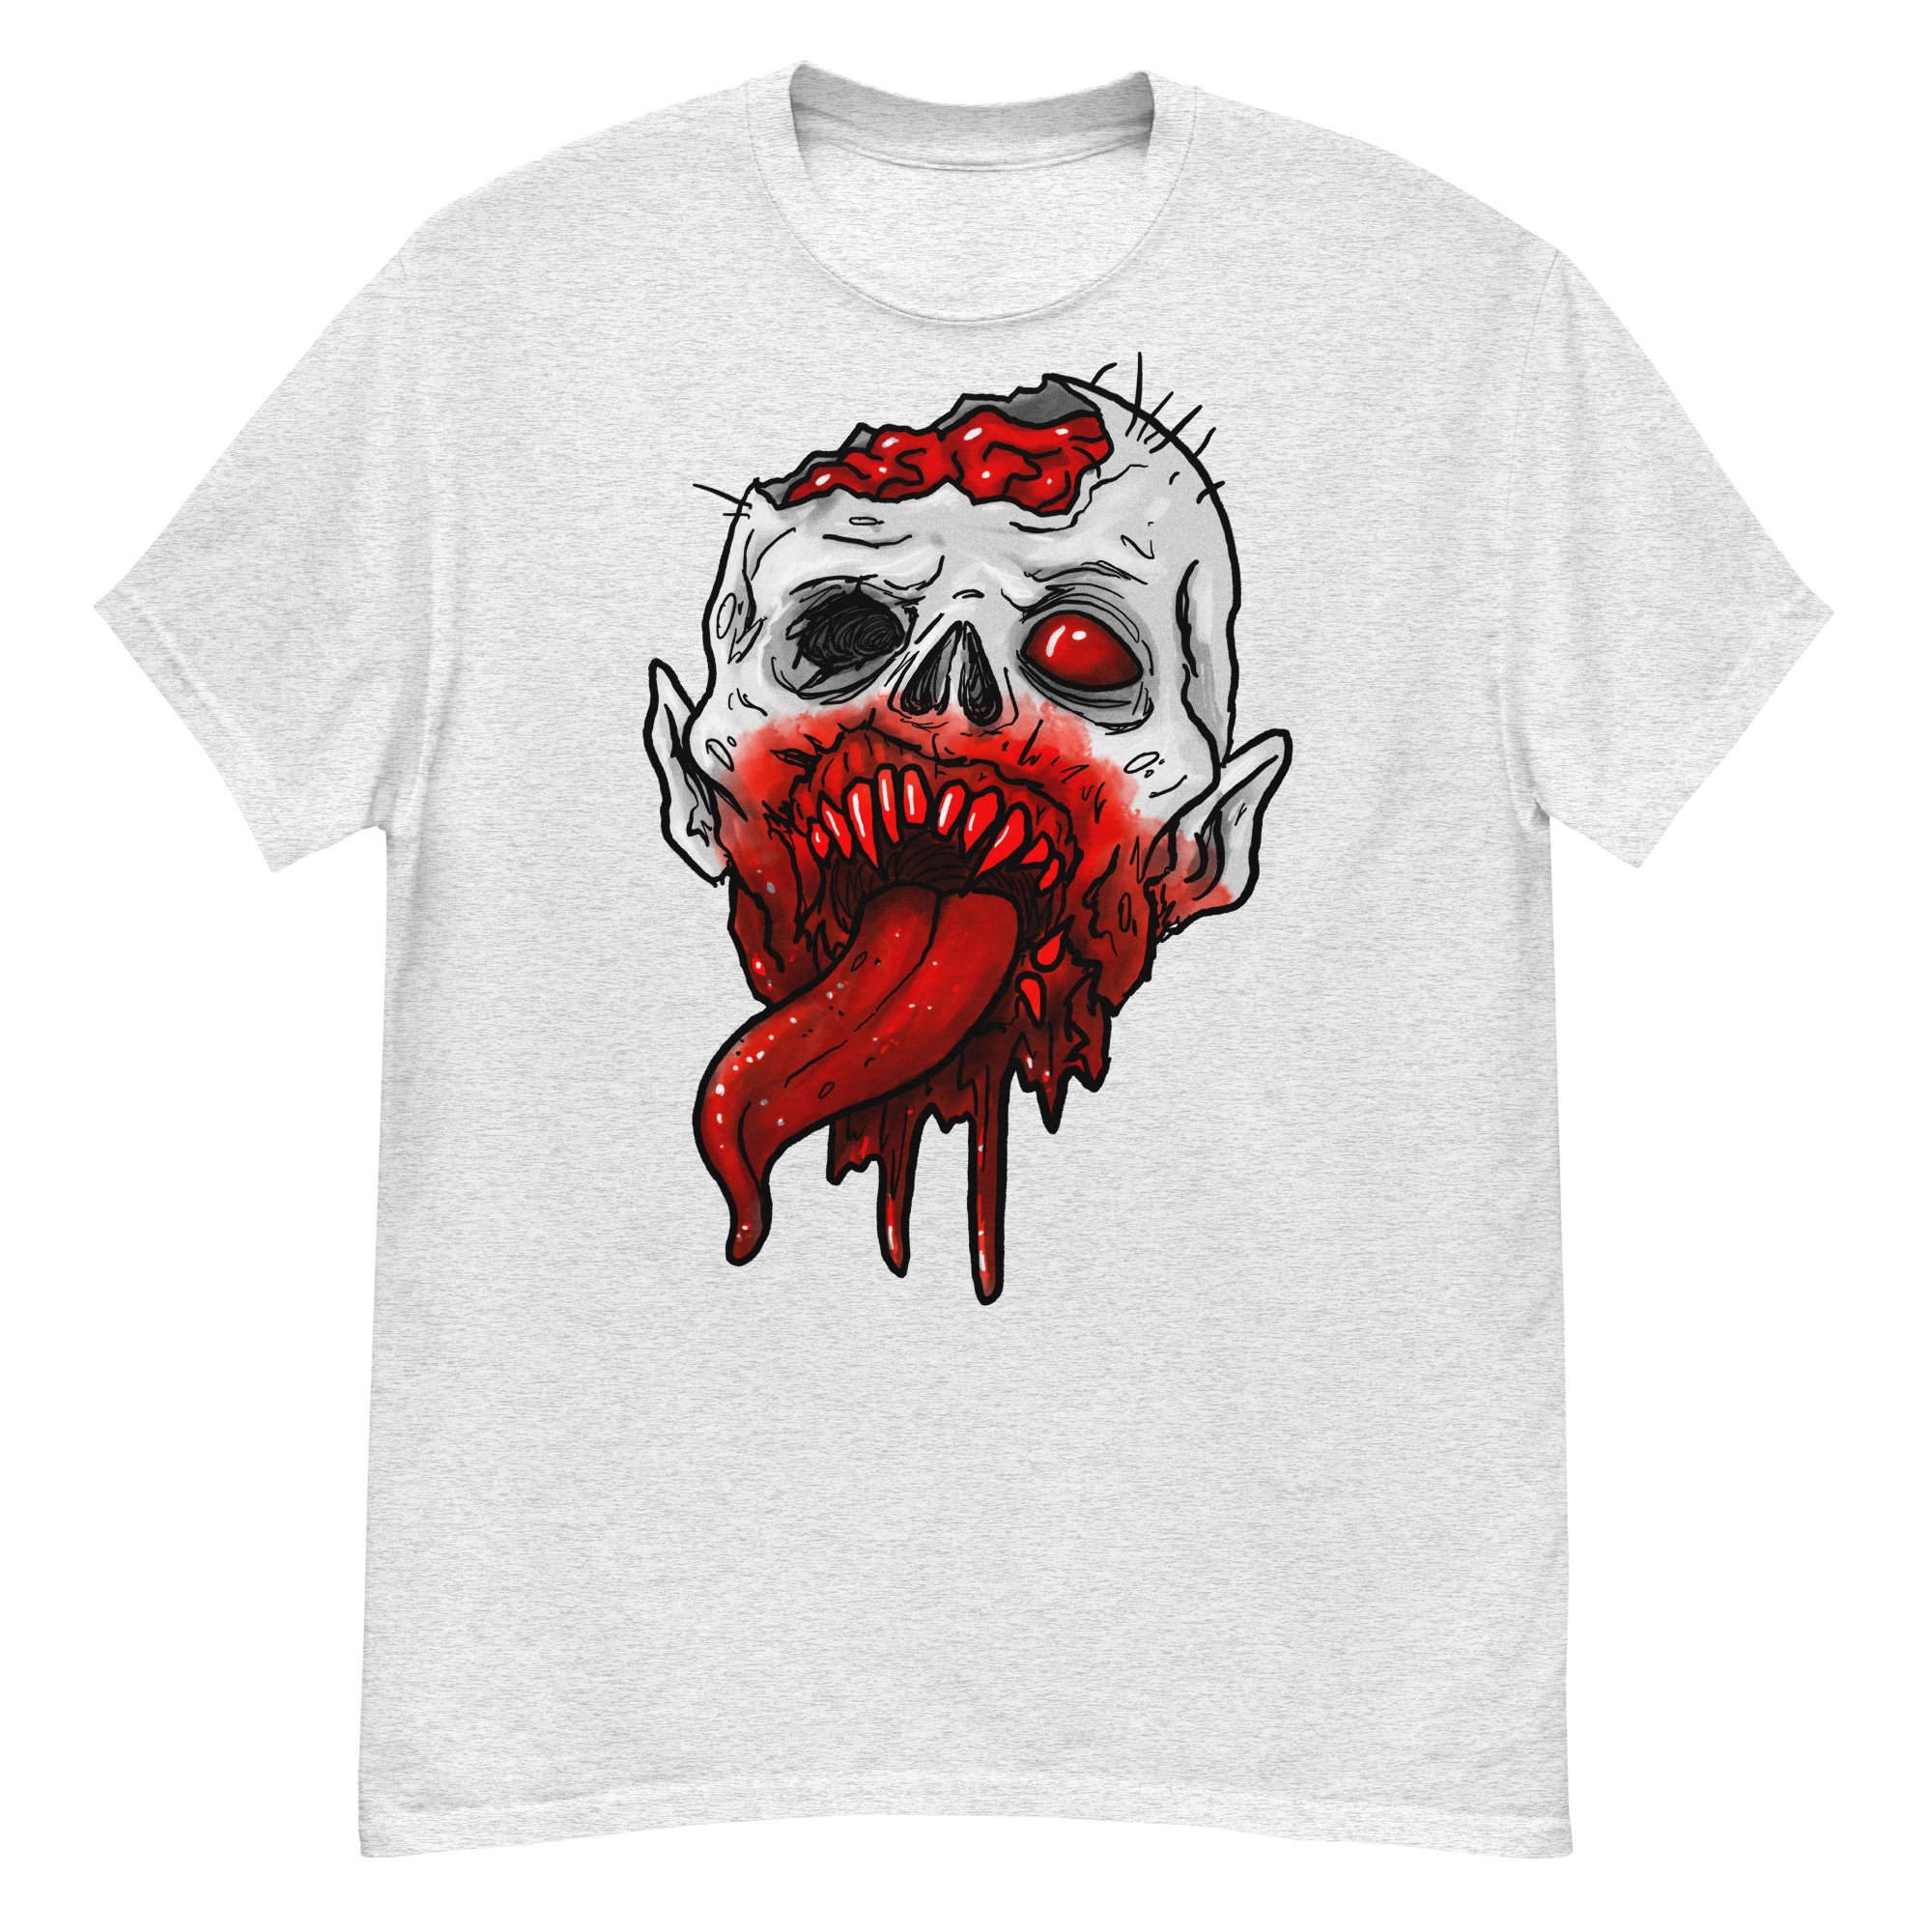 Featured image for “Zombie horror - Men's classic heavyweight tee”